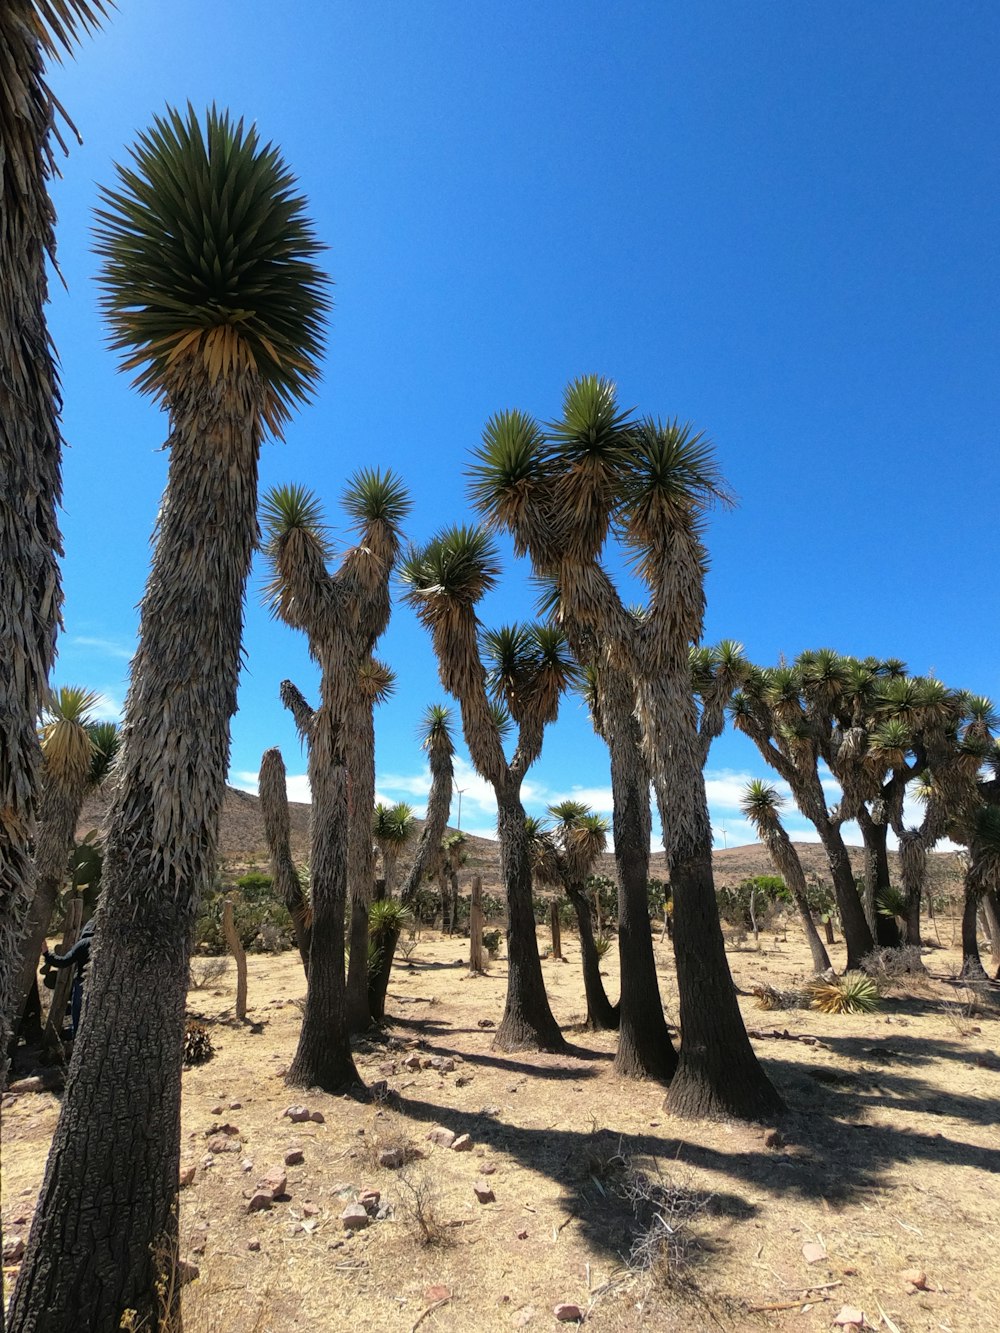 a group of palm trees in the desert